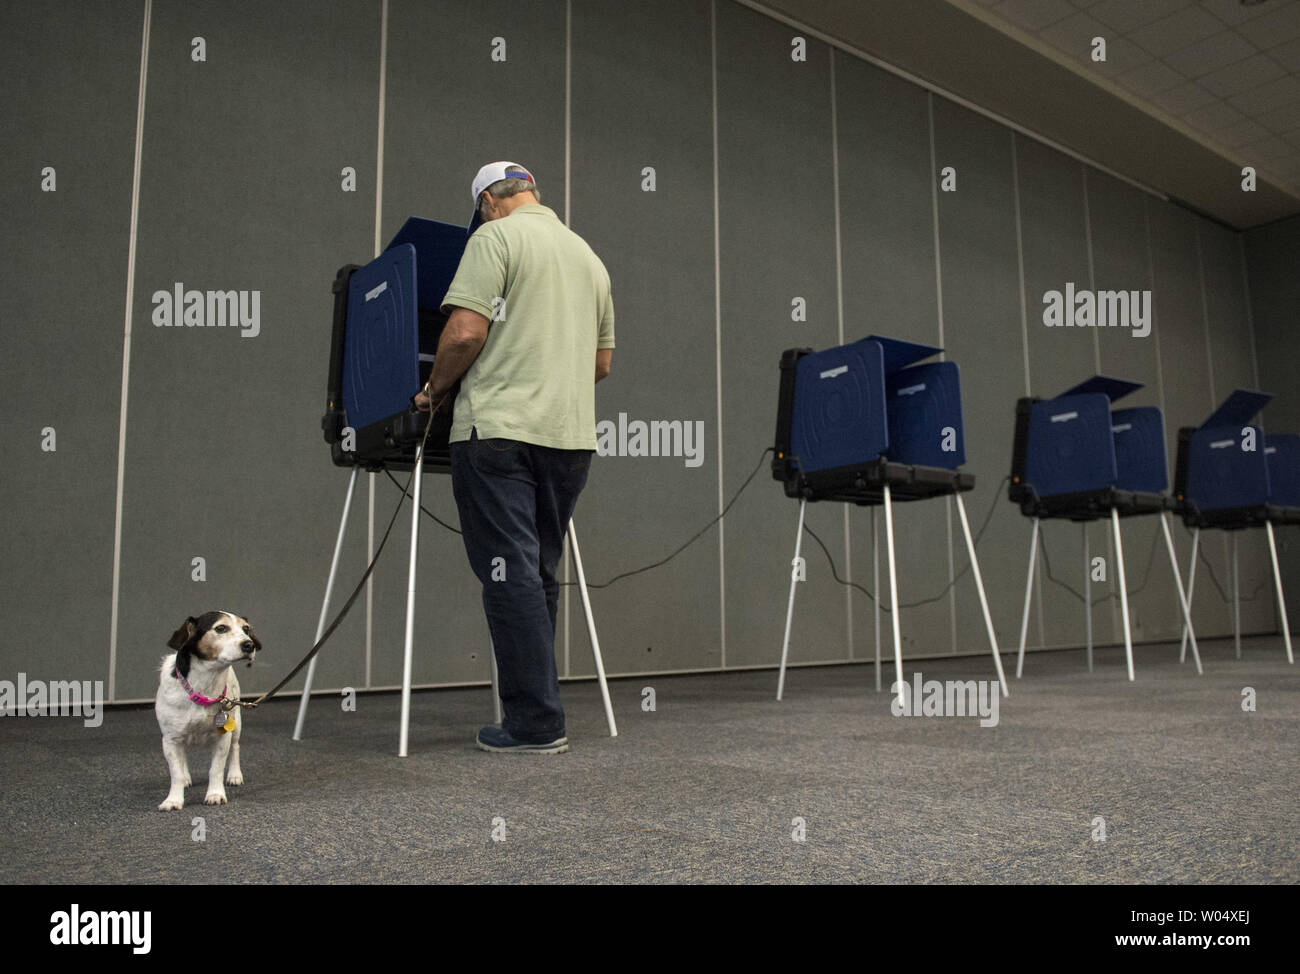 Allan Briggs, is joined by his dog Daisy, as he casts his vote in the South Carolina primary election, in Daniel Island, South Carolina on February 20, 2016. Photo by Kevin Dietsch/UPI Stock Photo